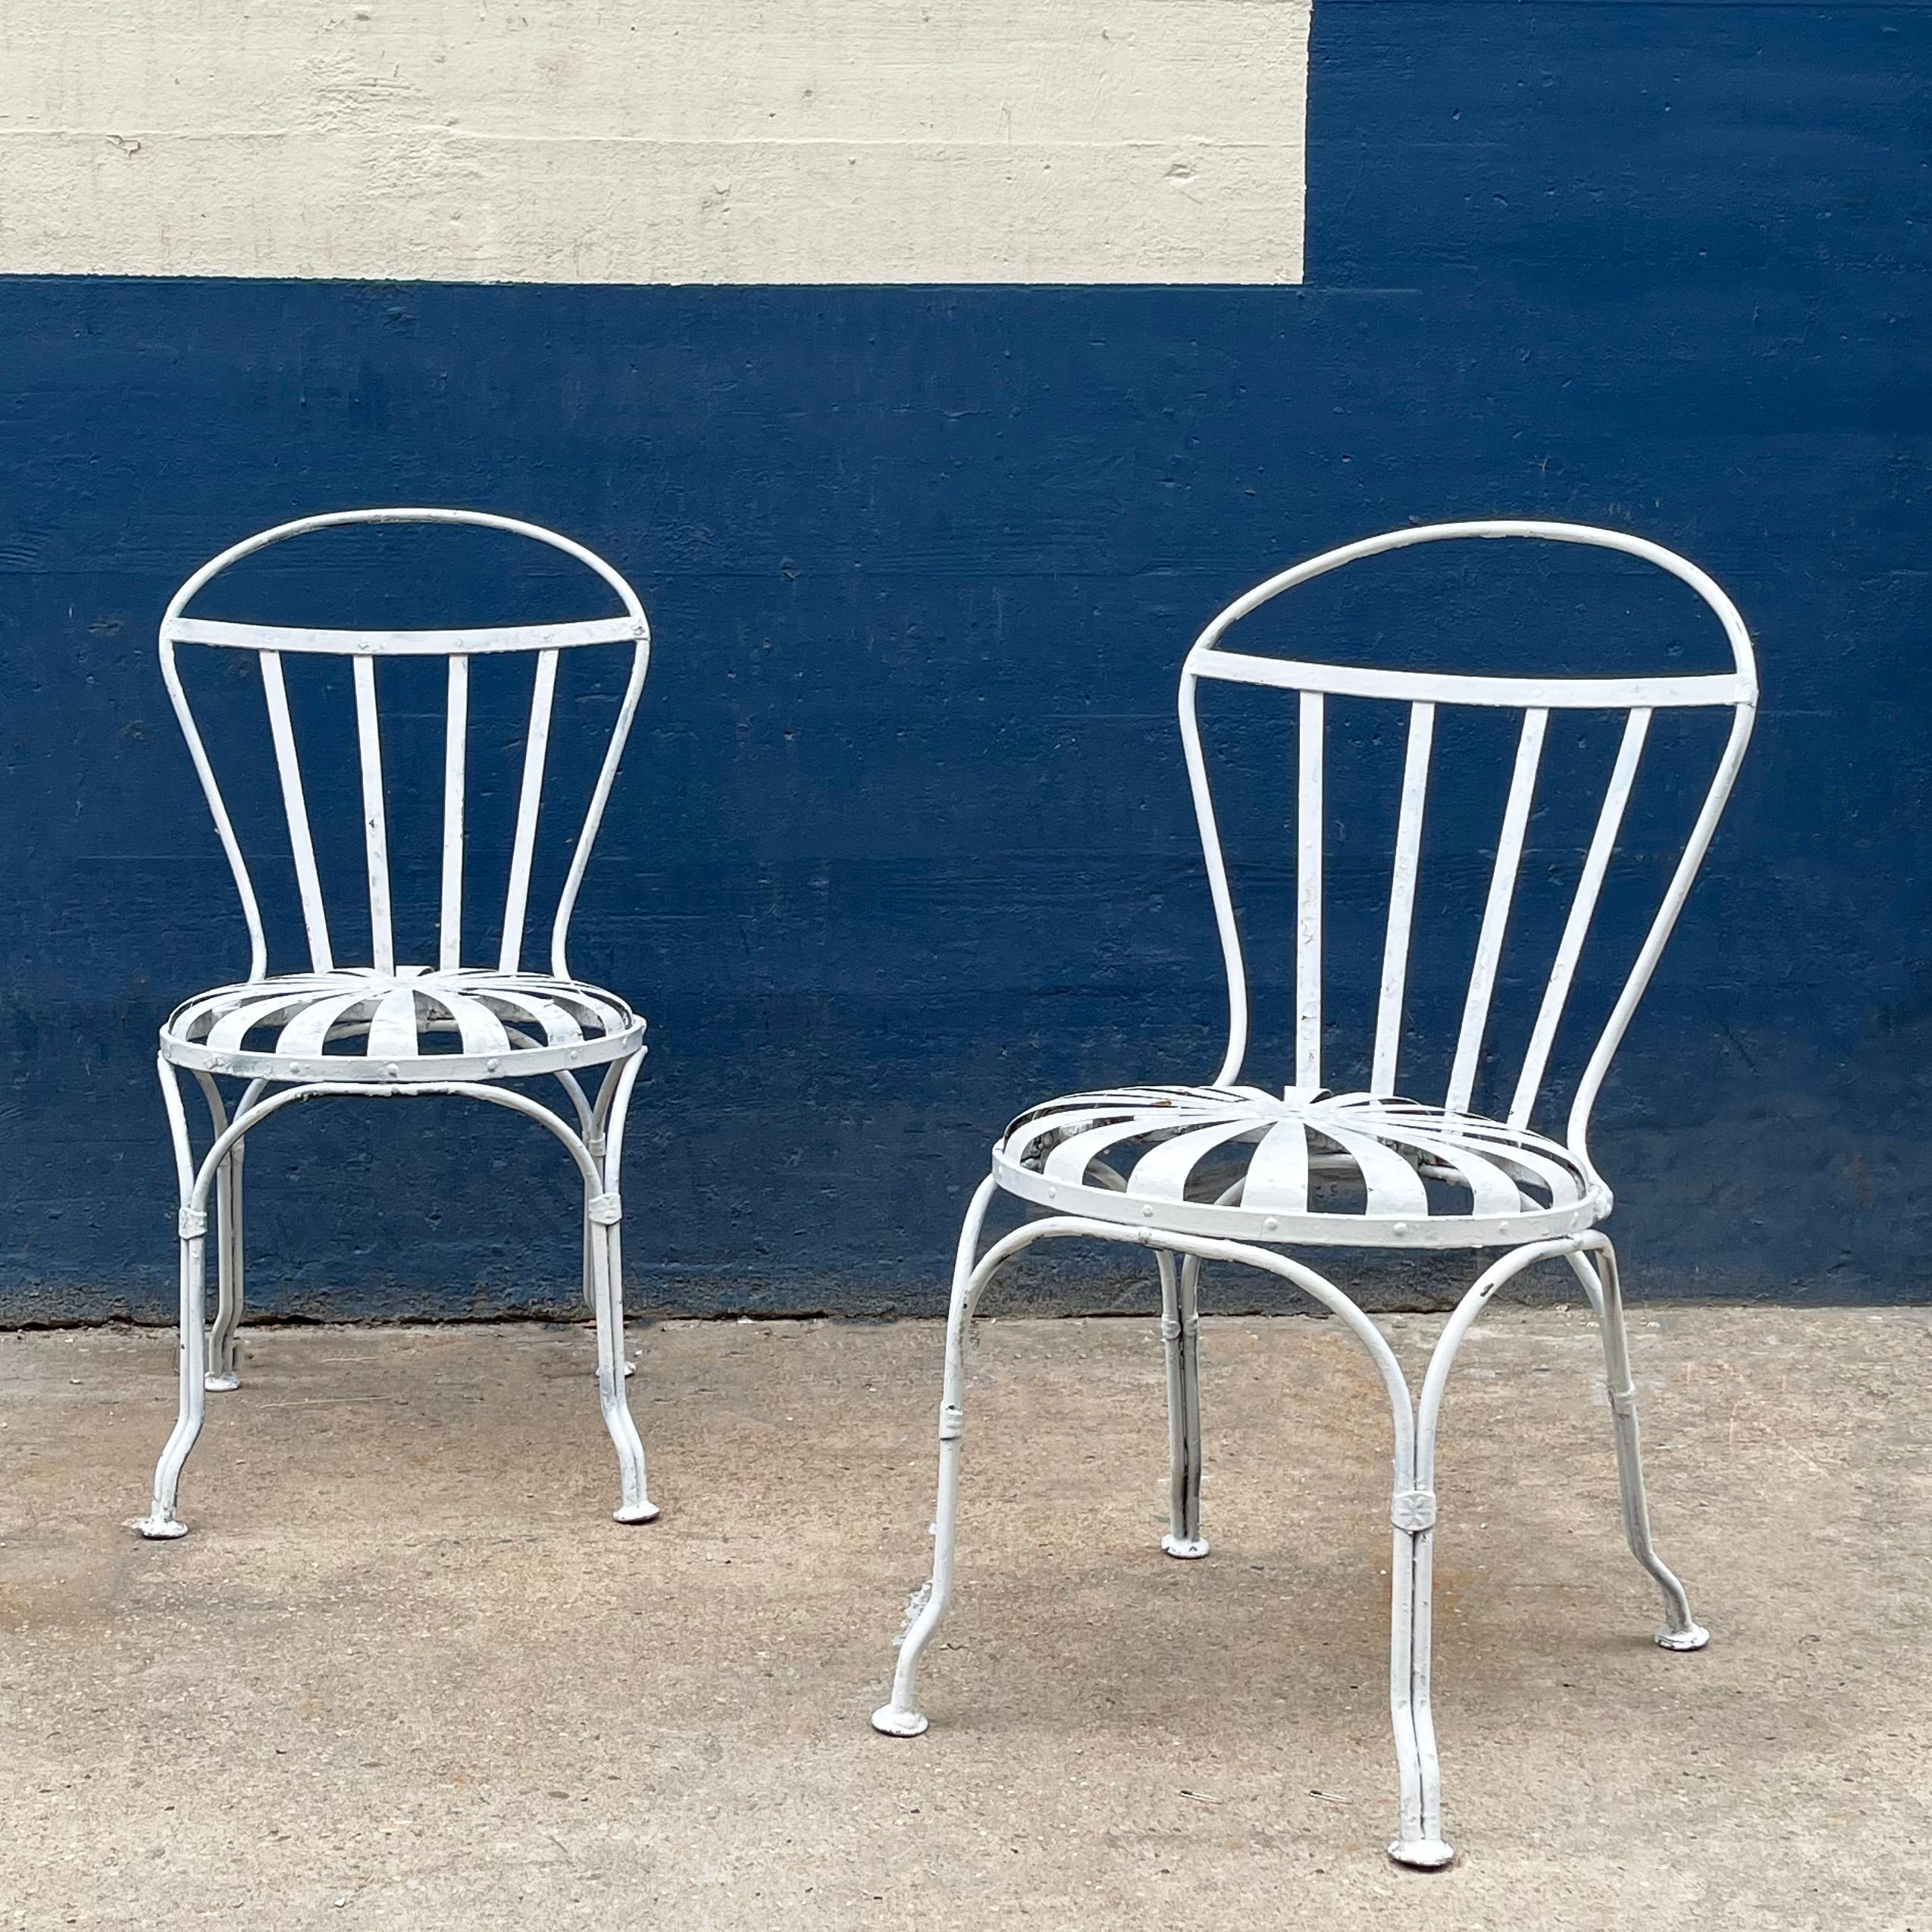 Pair of Art Deco, painted wrought iron, outdoor, garden side chairs by Francois Carré feature sunburst motif seats.